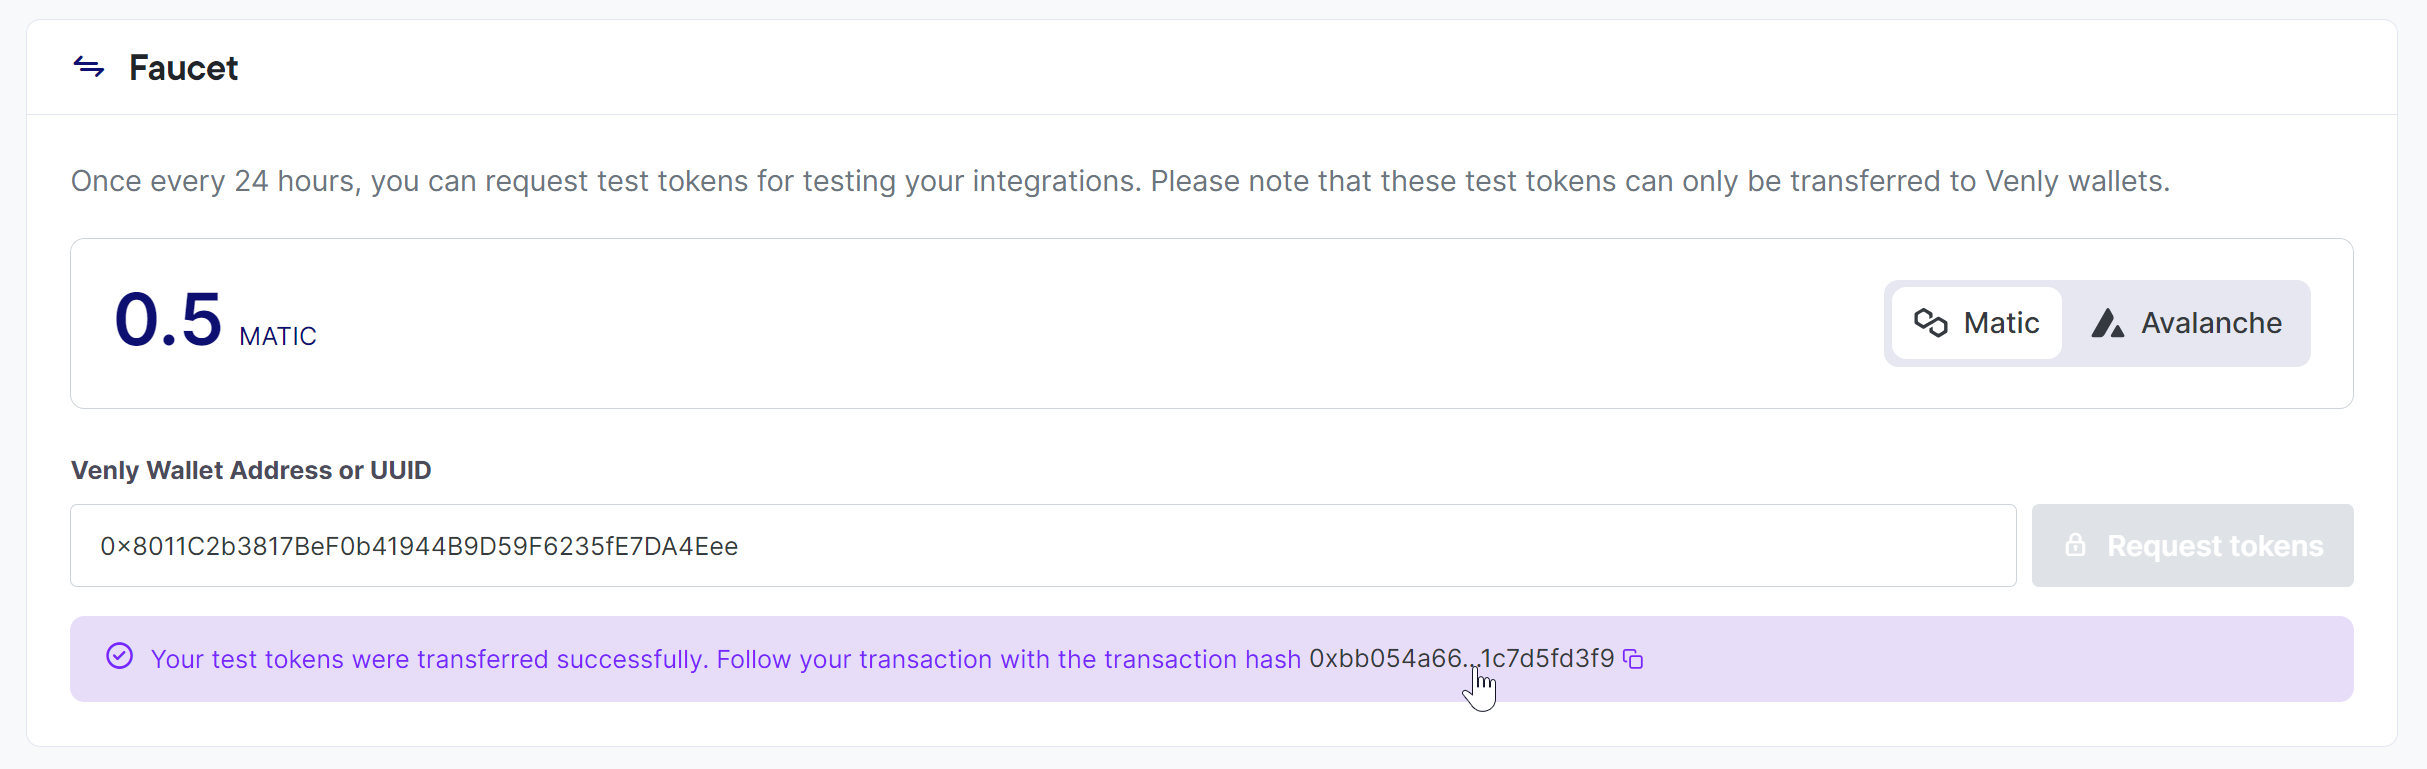 Tokens transferred successfully